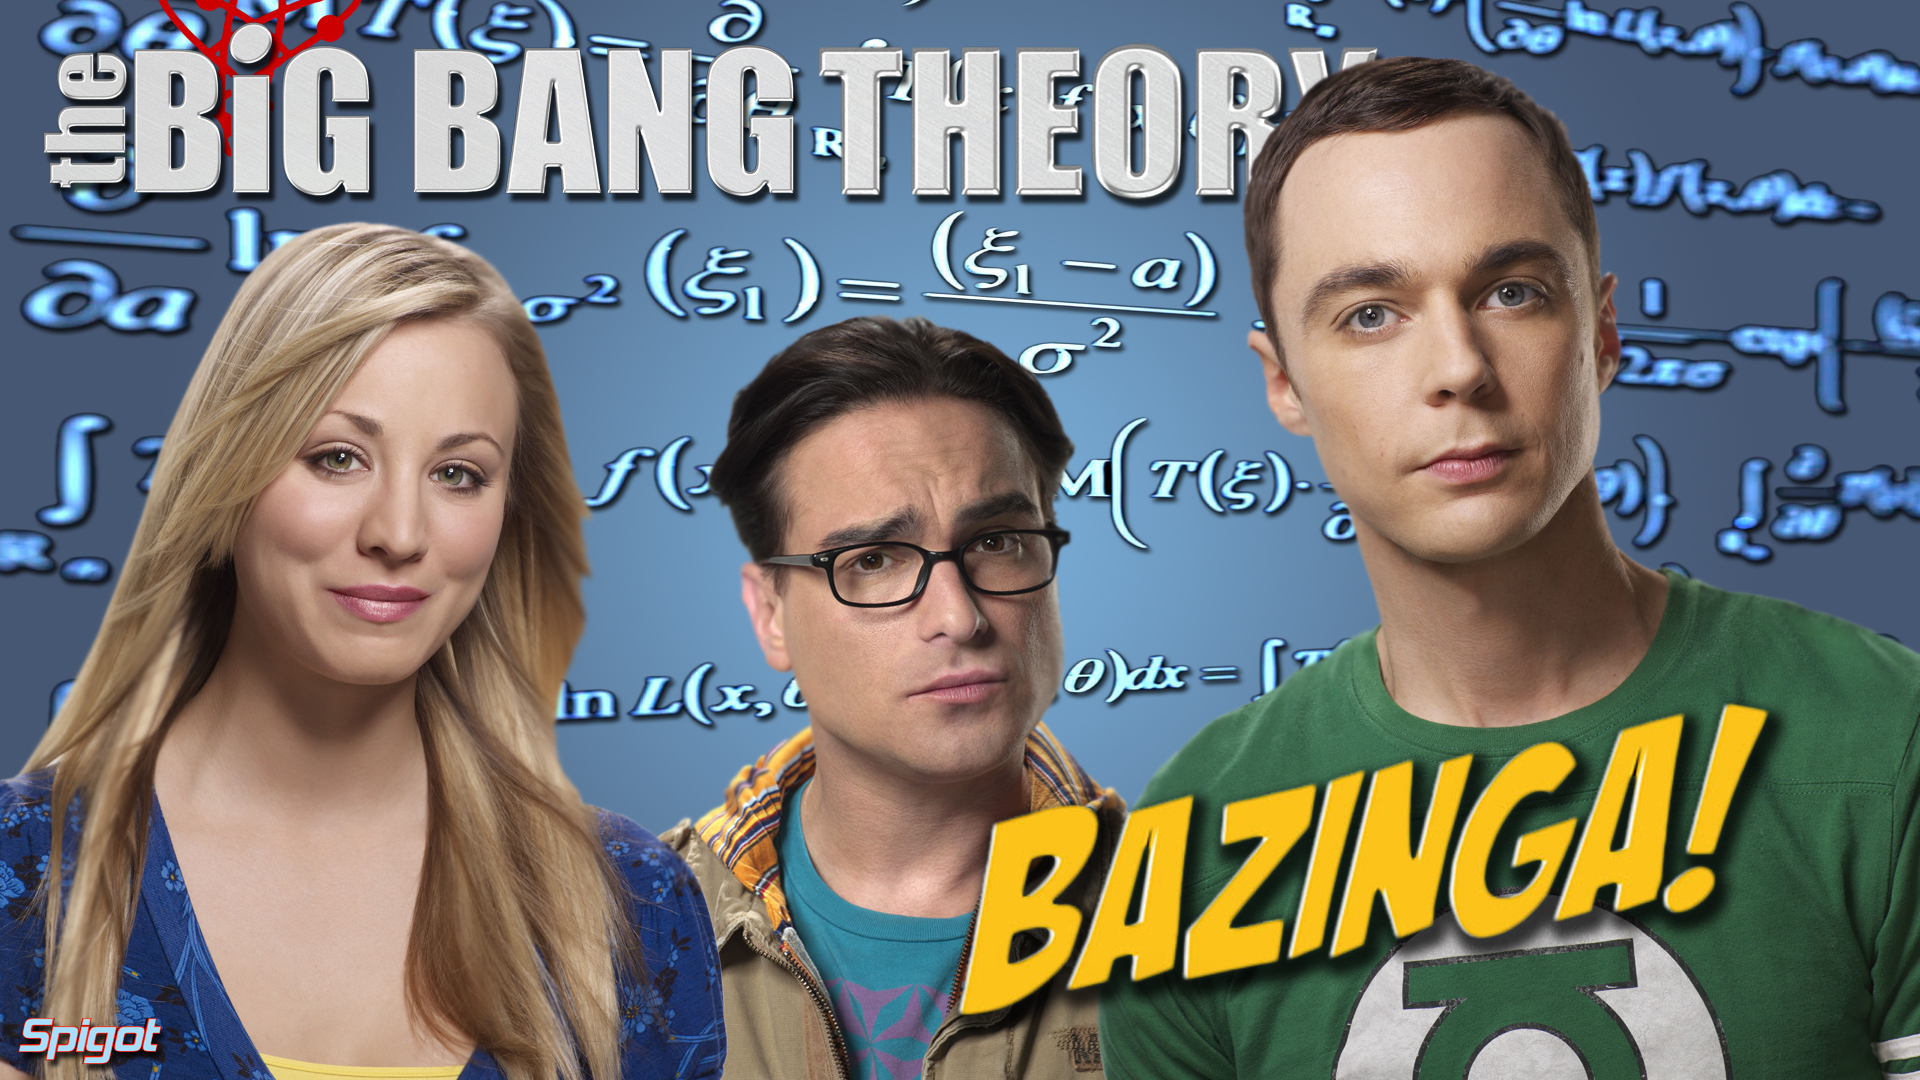 The Big Bang Theory Wallpaper, Picture, Image